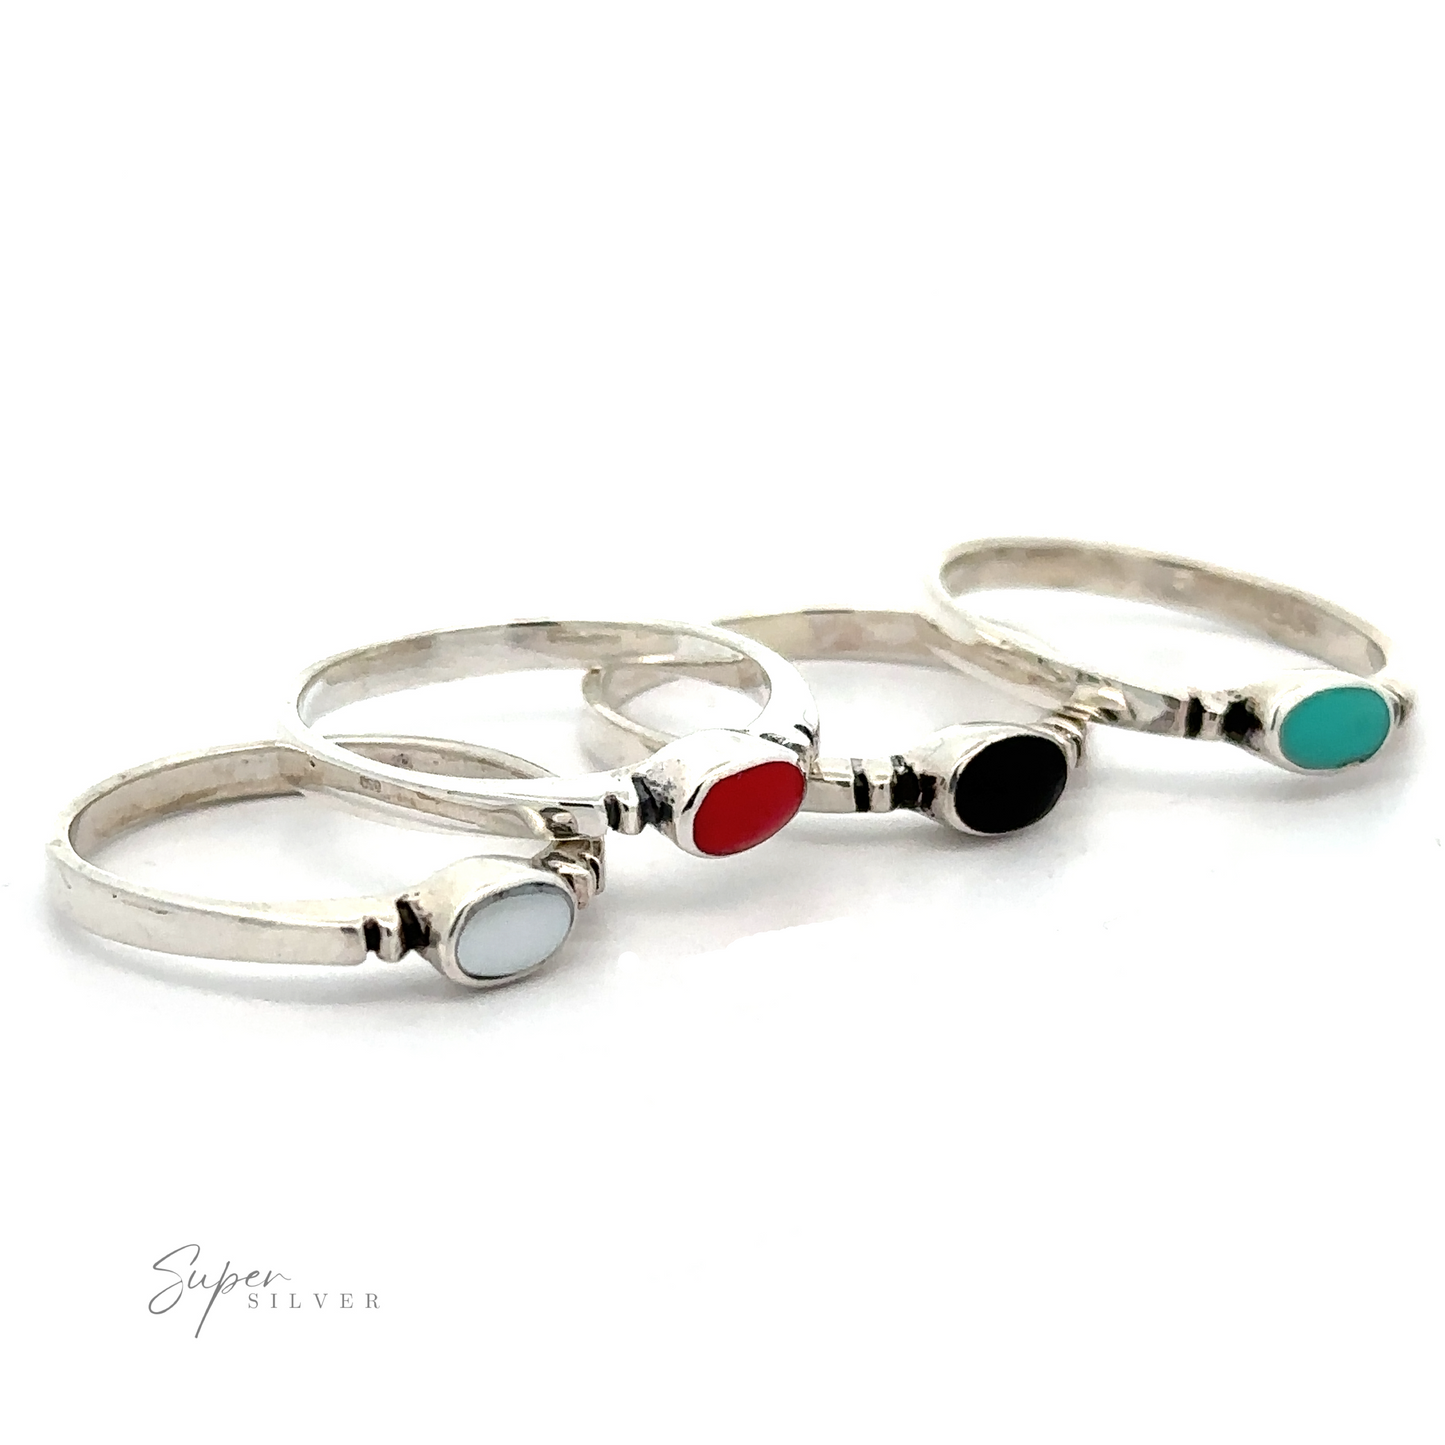 A set of four Small Horizontal Oval Inlay Rings with dainty and sleek design, featuring sideways oval stone rings in a minimalist style.